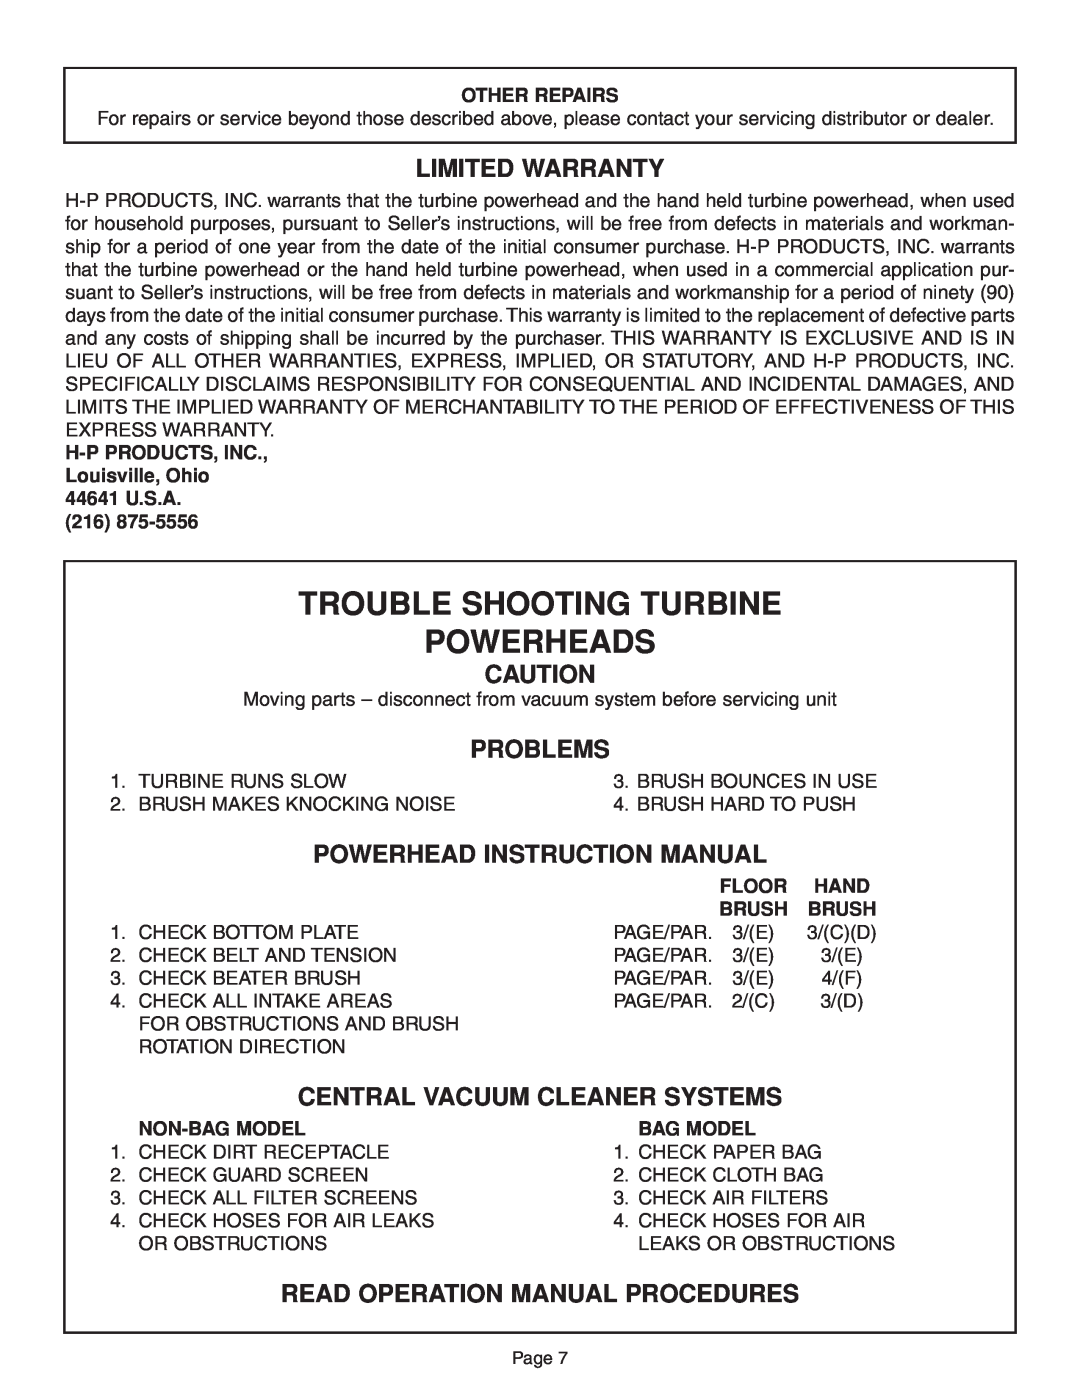 H-P Products TURBINE POWERHEAD and HAND HELD TURBINE POWERHEAD Limited Warranty, Problems, Central Vacuum Cleaner Systems 